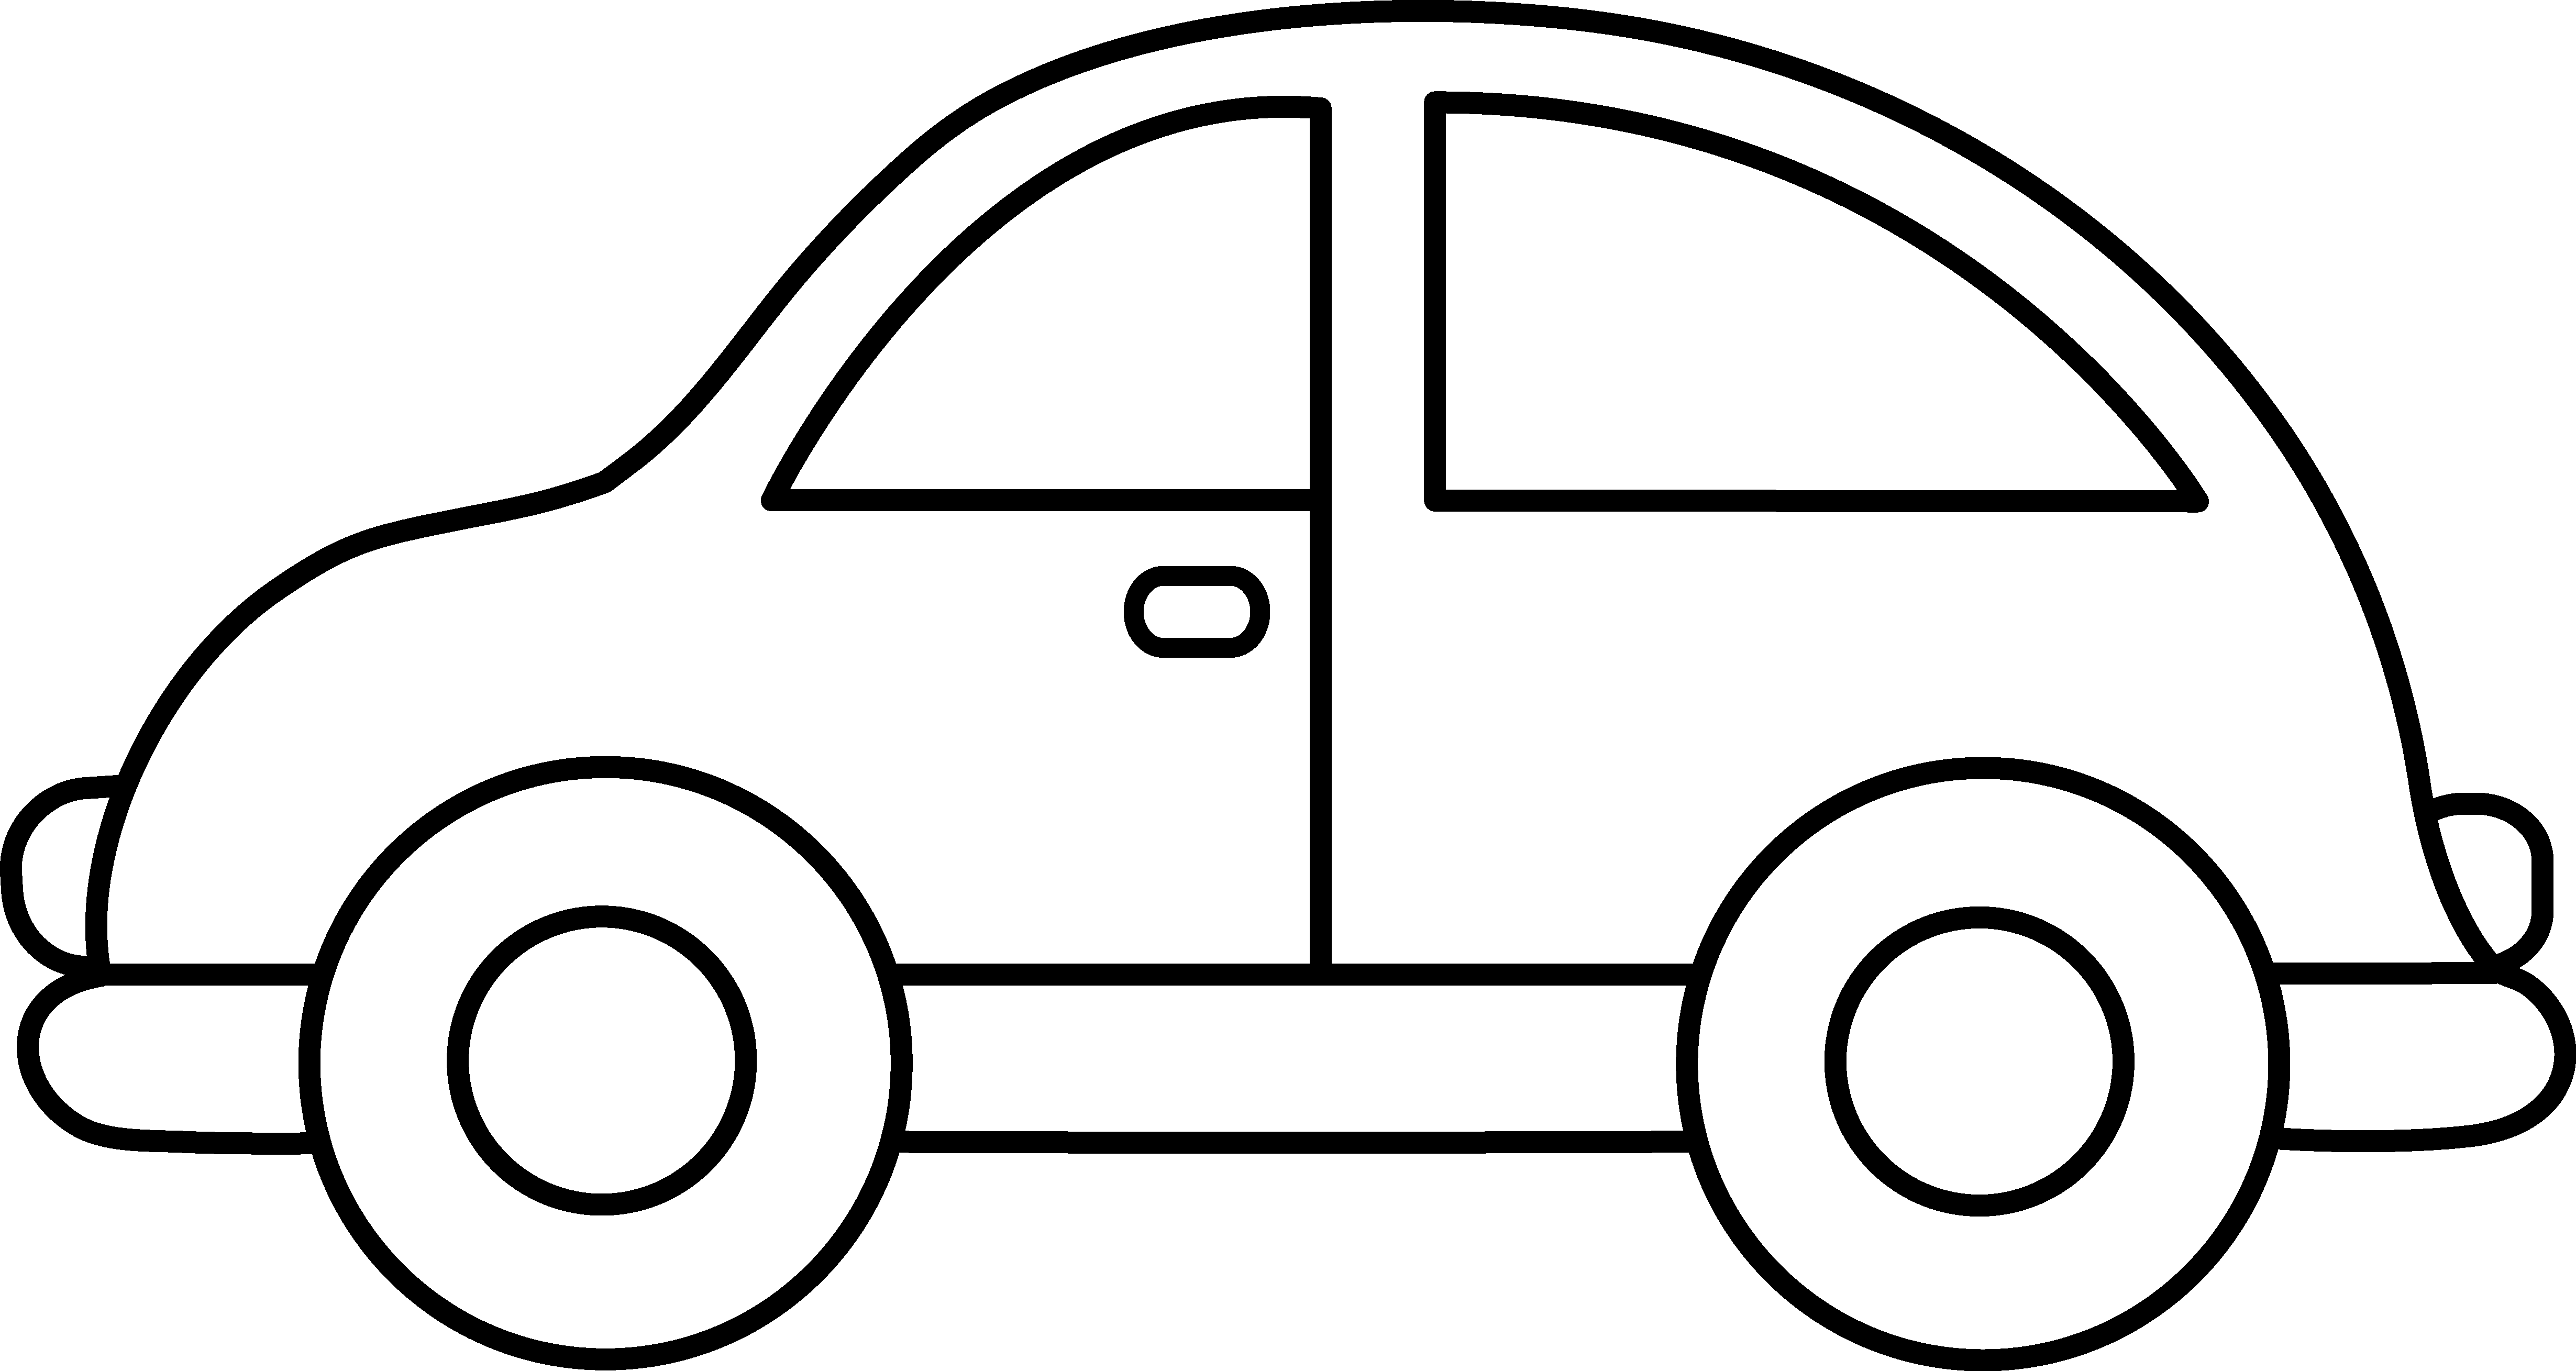 Car silhouette at getdrawings. Clipart road coloring page